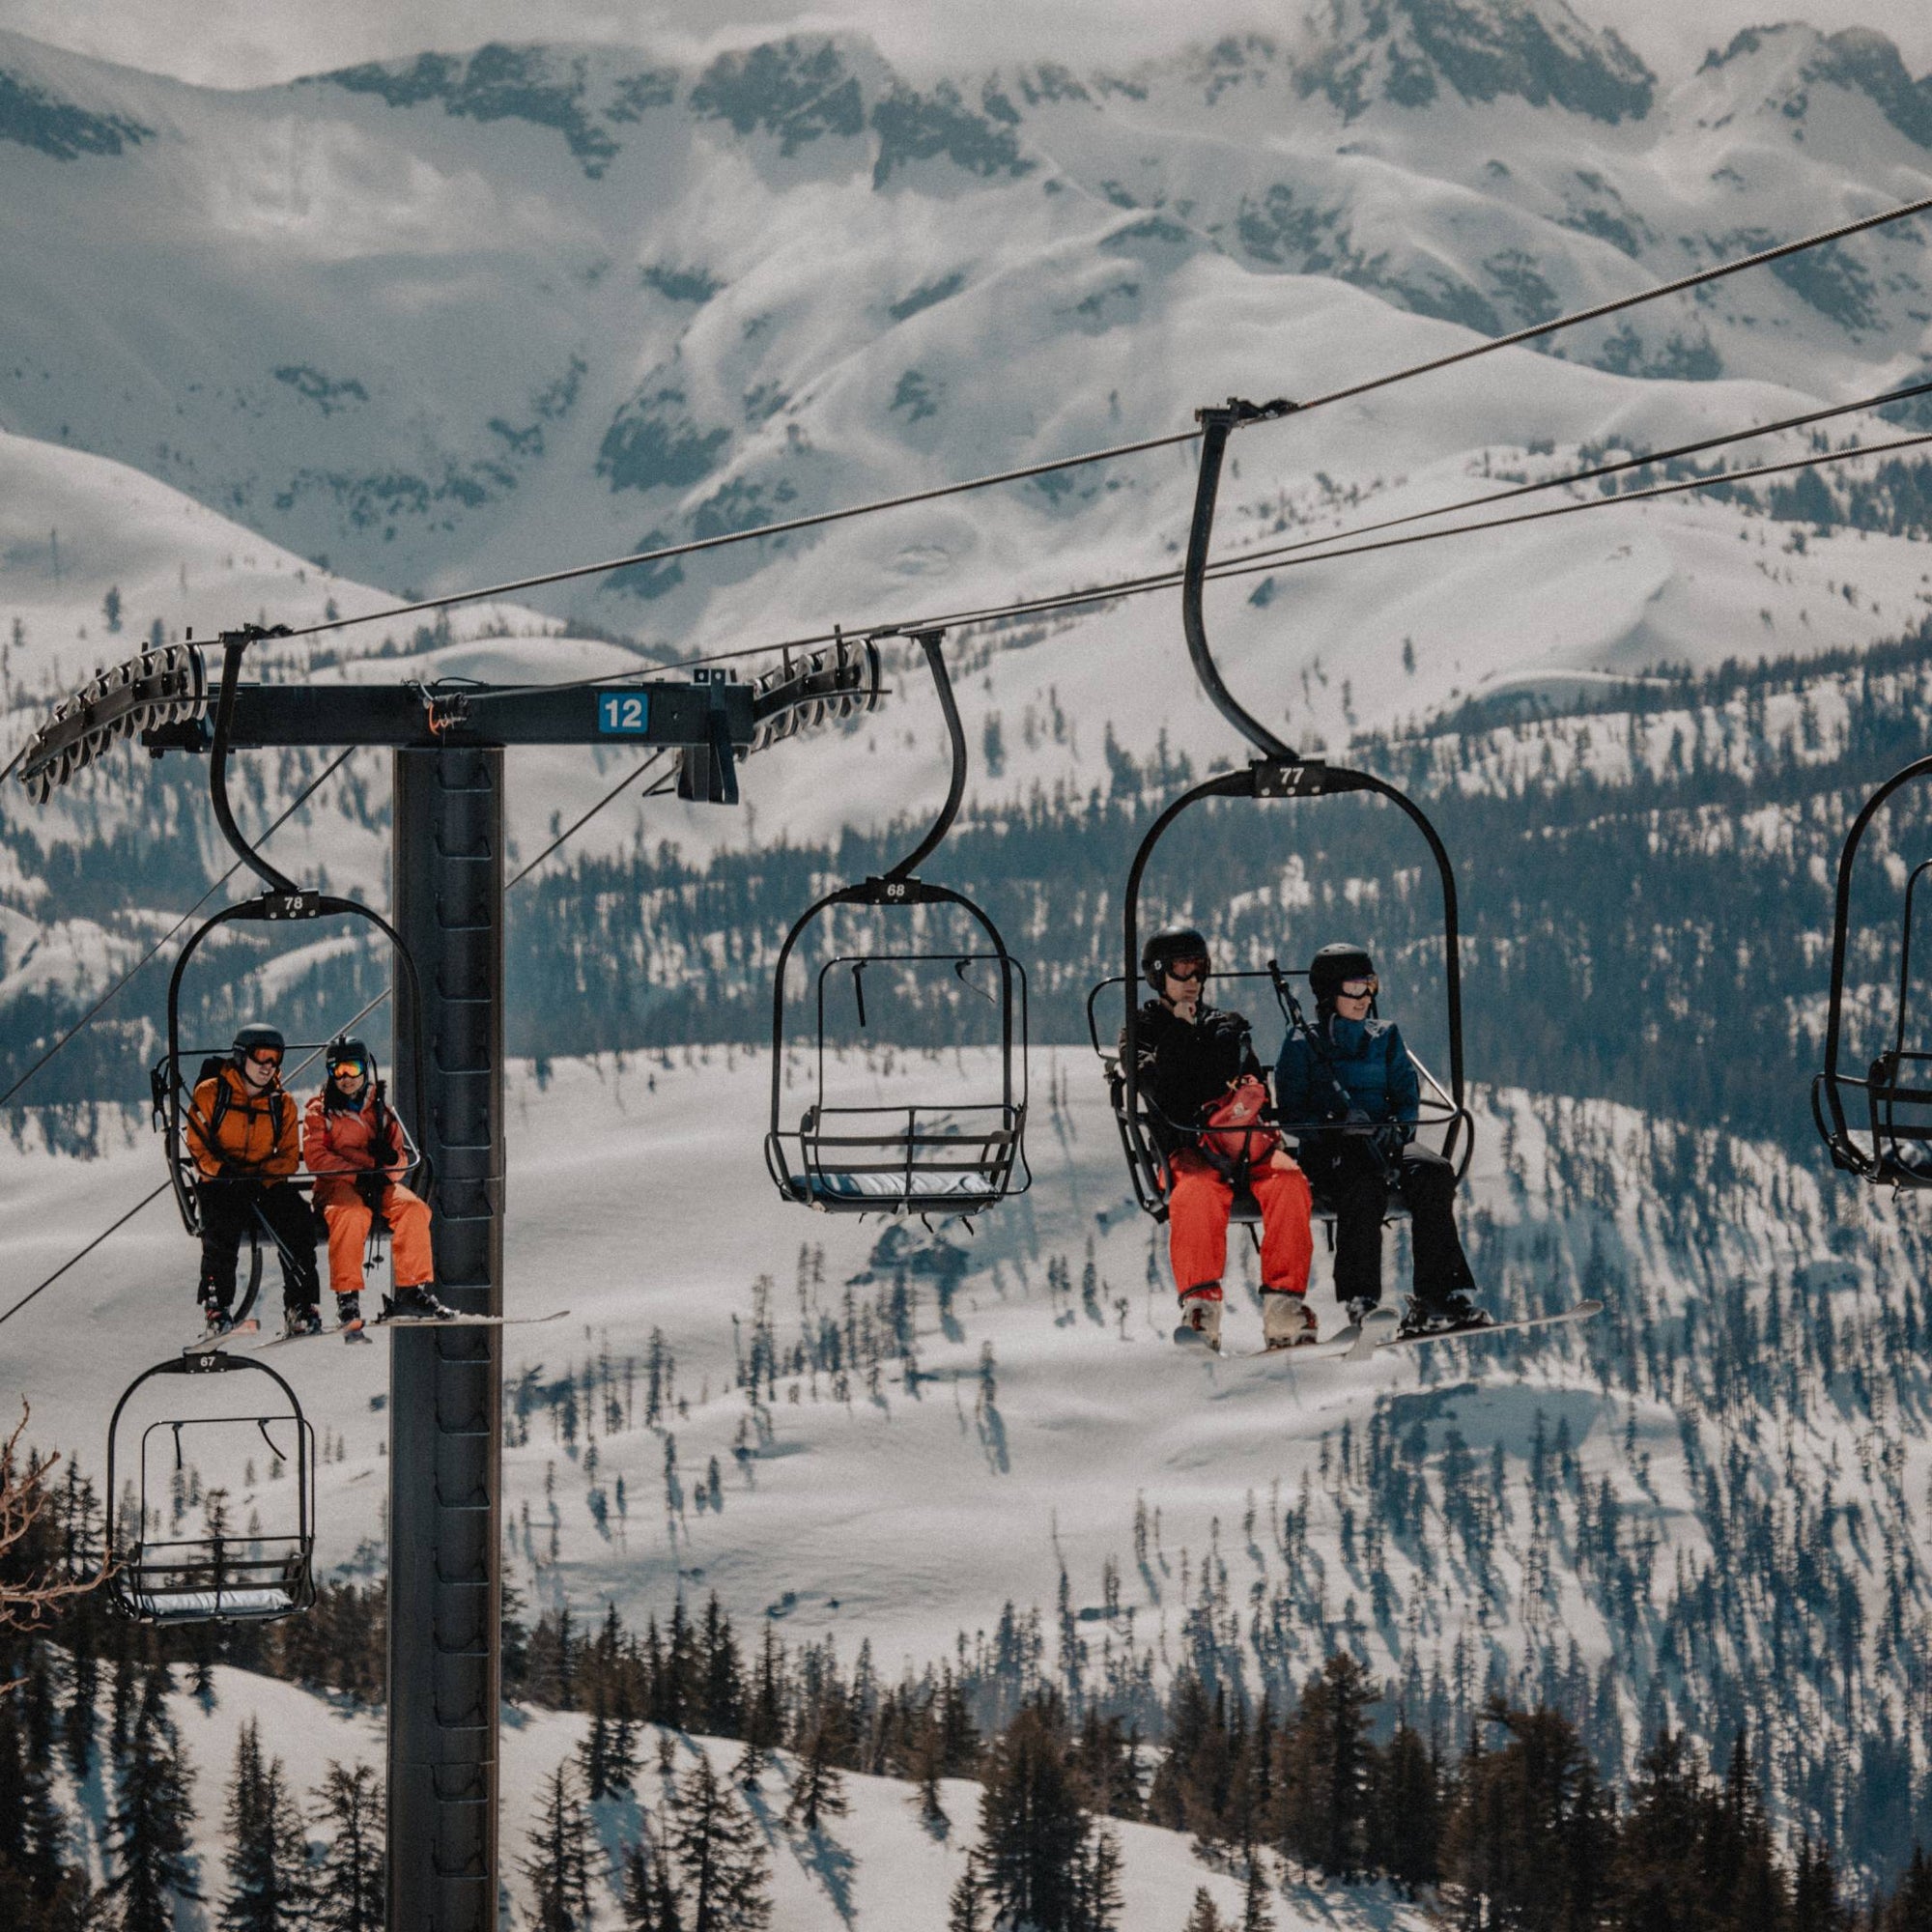 Skiiers on a chair lift